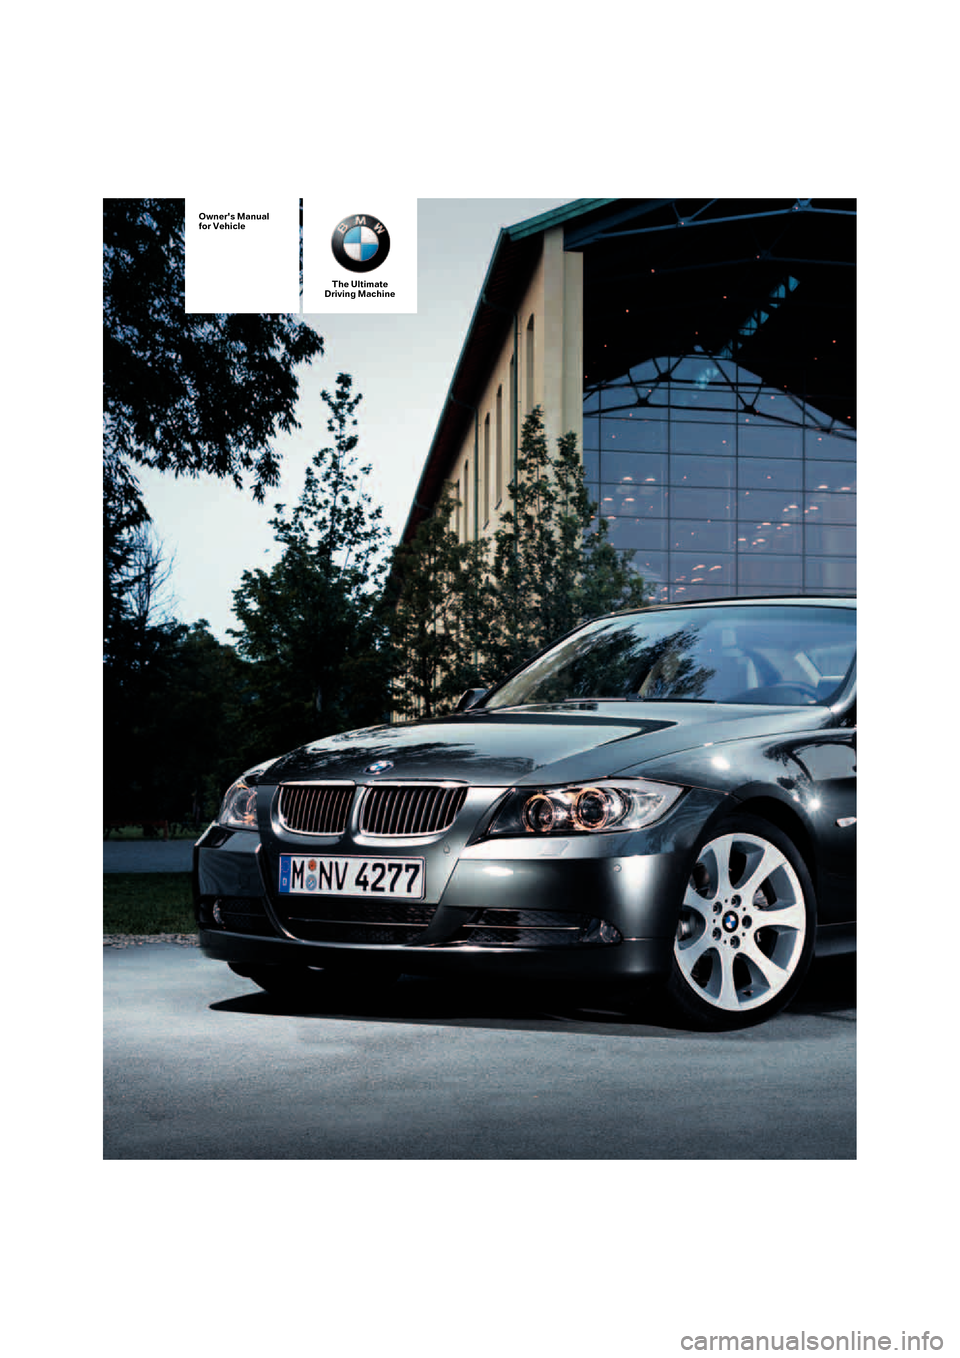 BMW 328I SEDAN 2008 E90 Owners Manual The Ultimate
Driving Machine
Owners Manual
for Vehicle 